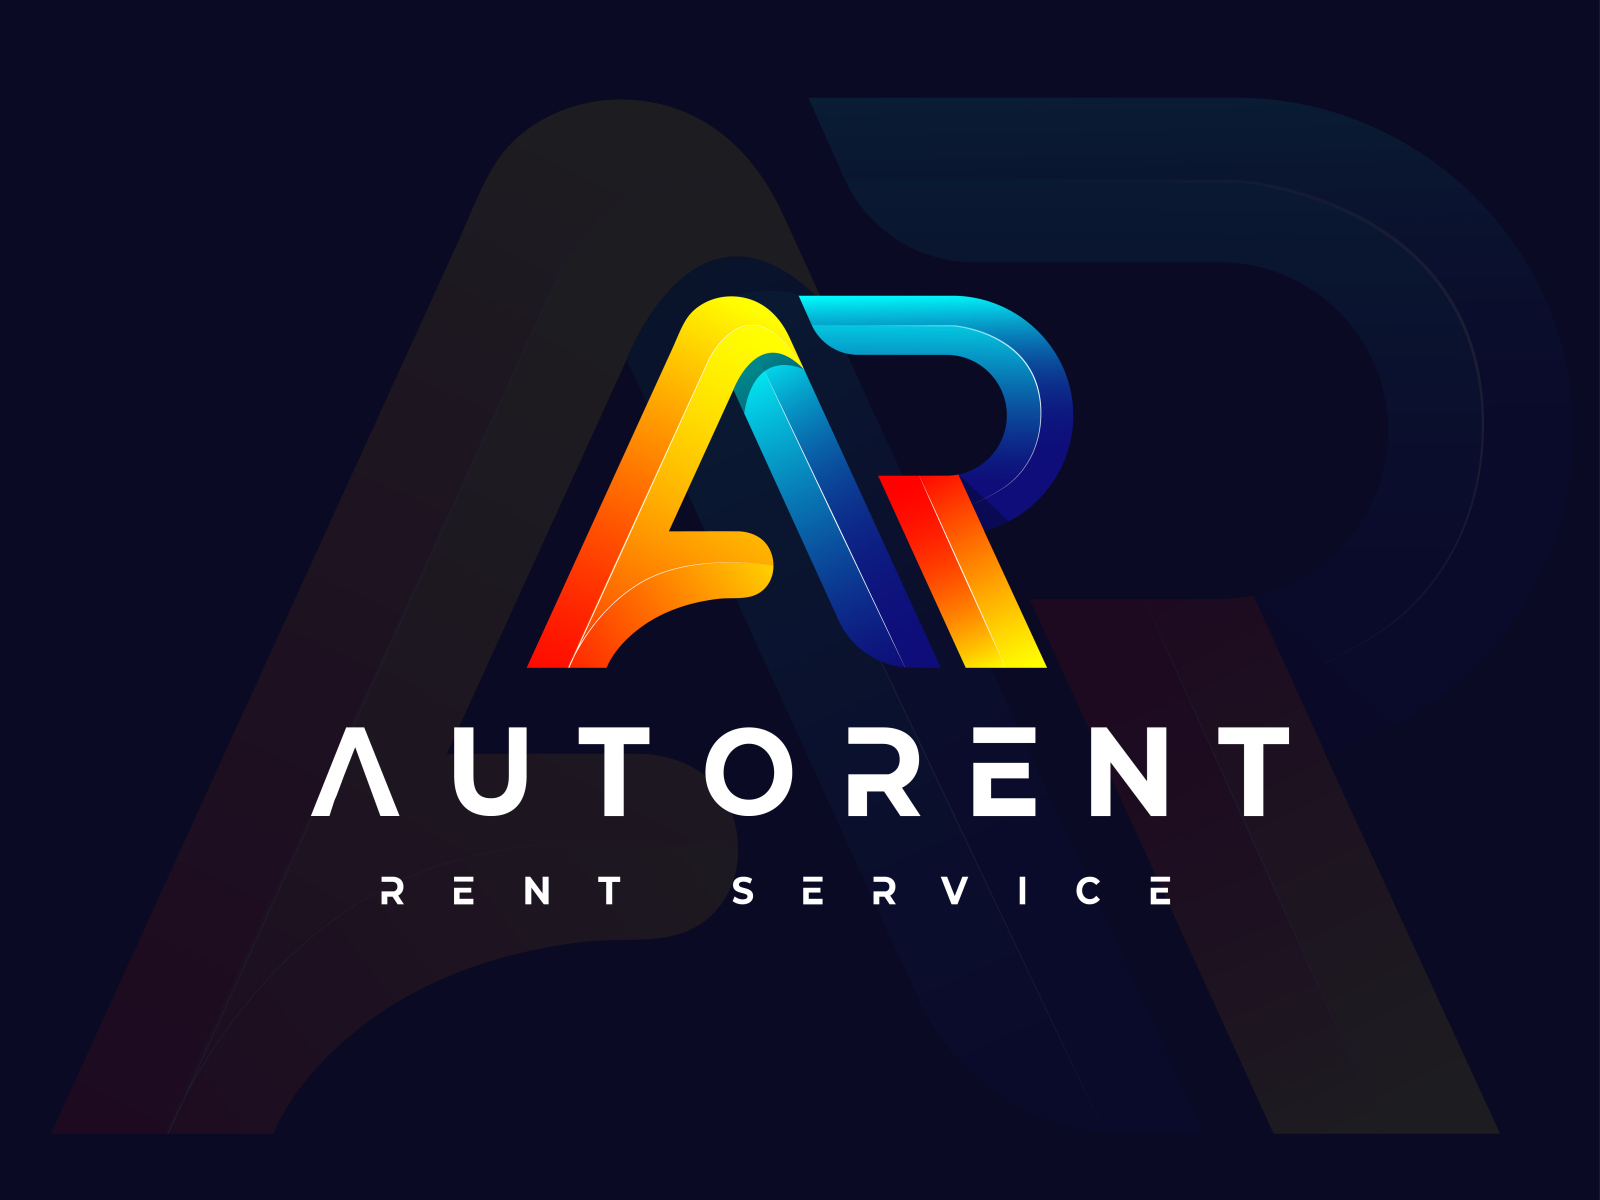 AR Abstract logo designs by Fieon Art on Dribbble